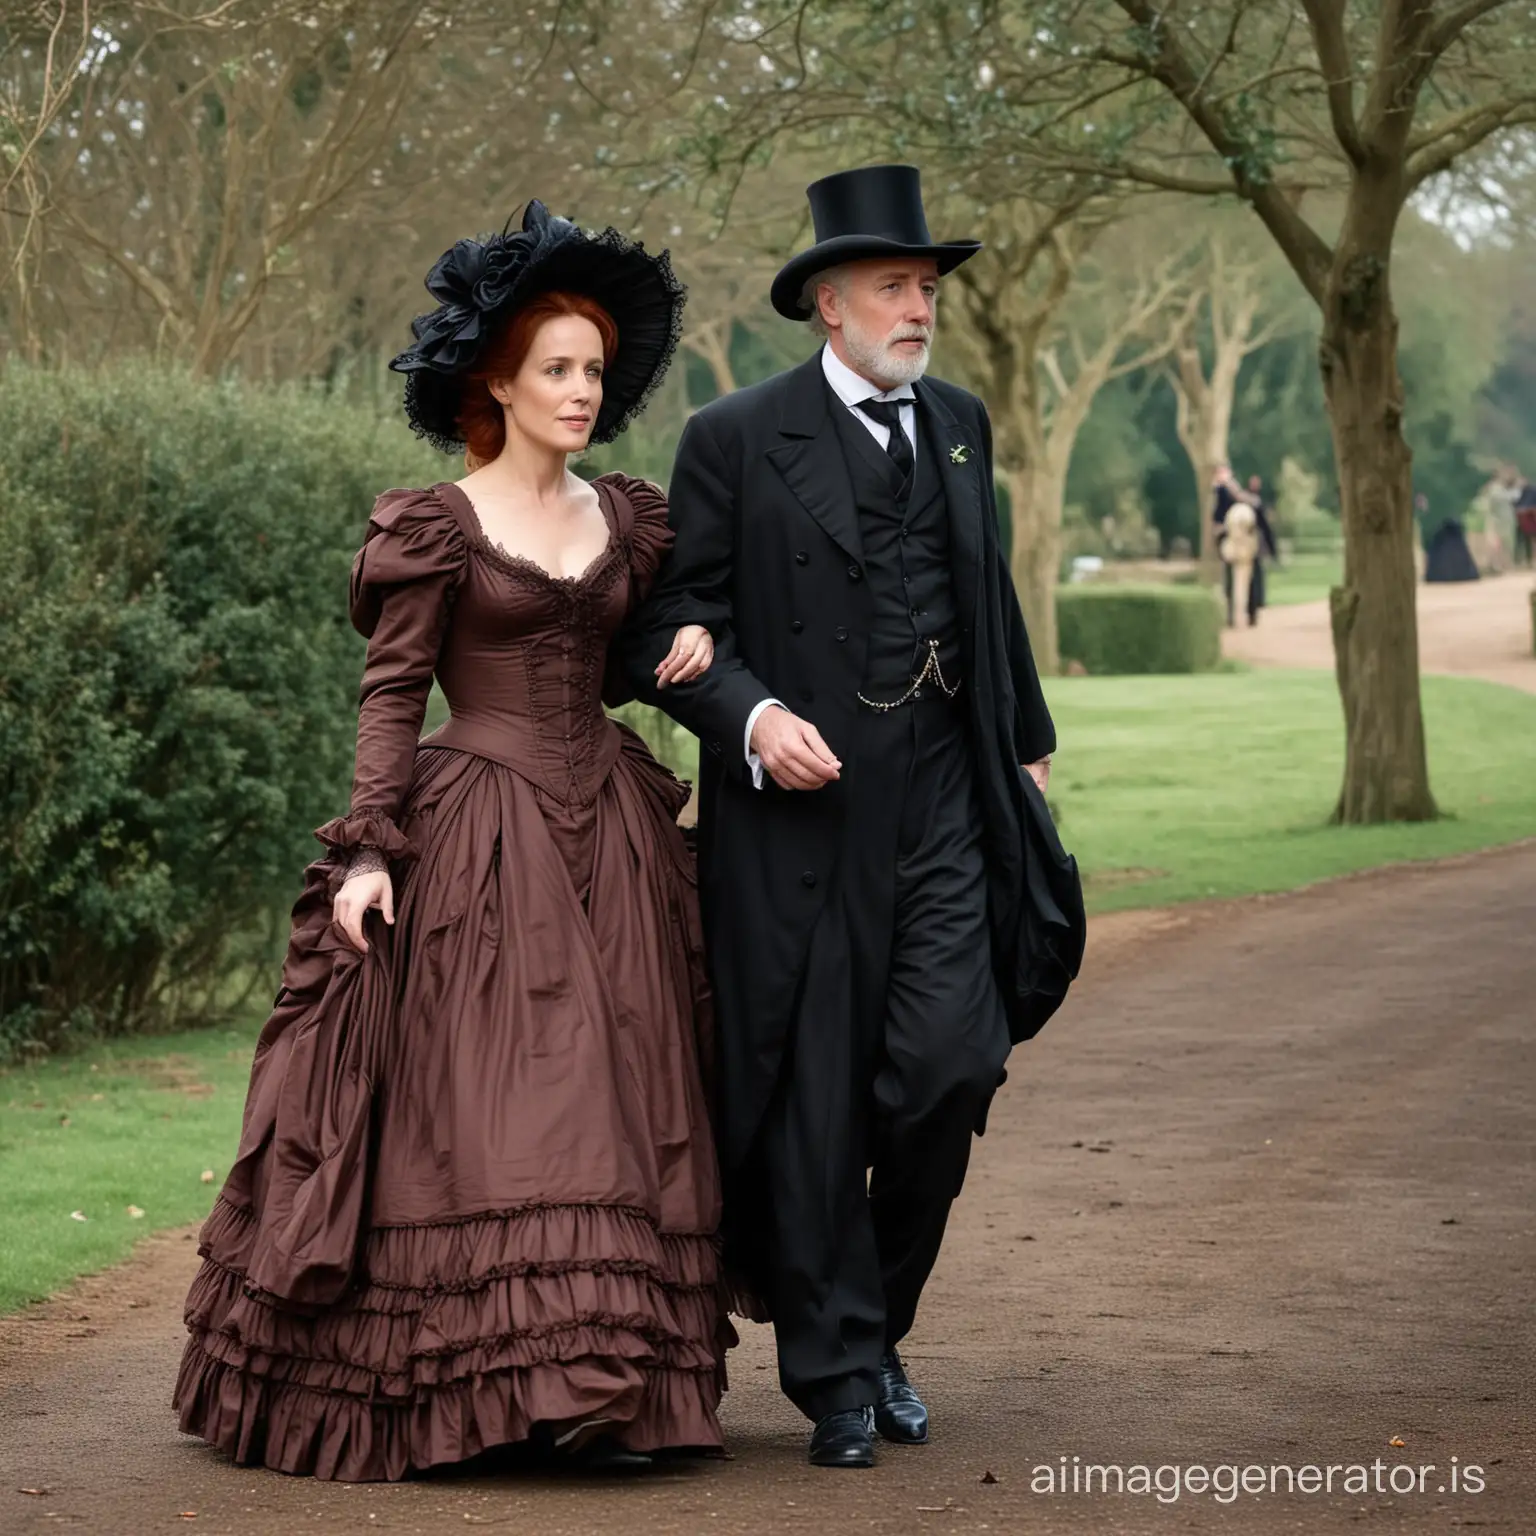 red hair Gillian Anderson wearing a dark brown floor-length loose billowing 1860 Victorian crinoline poofy dress with a frilly bonnet walking with an old man dressed into a black Victorian suit who seems to be her newlywed husband